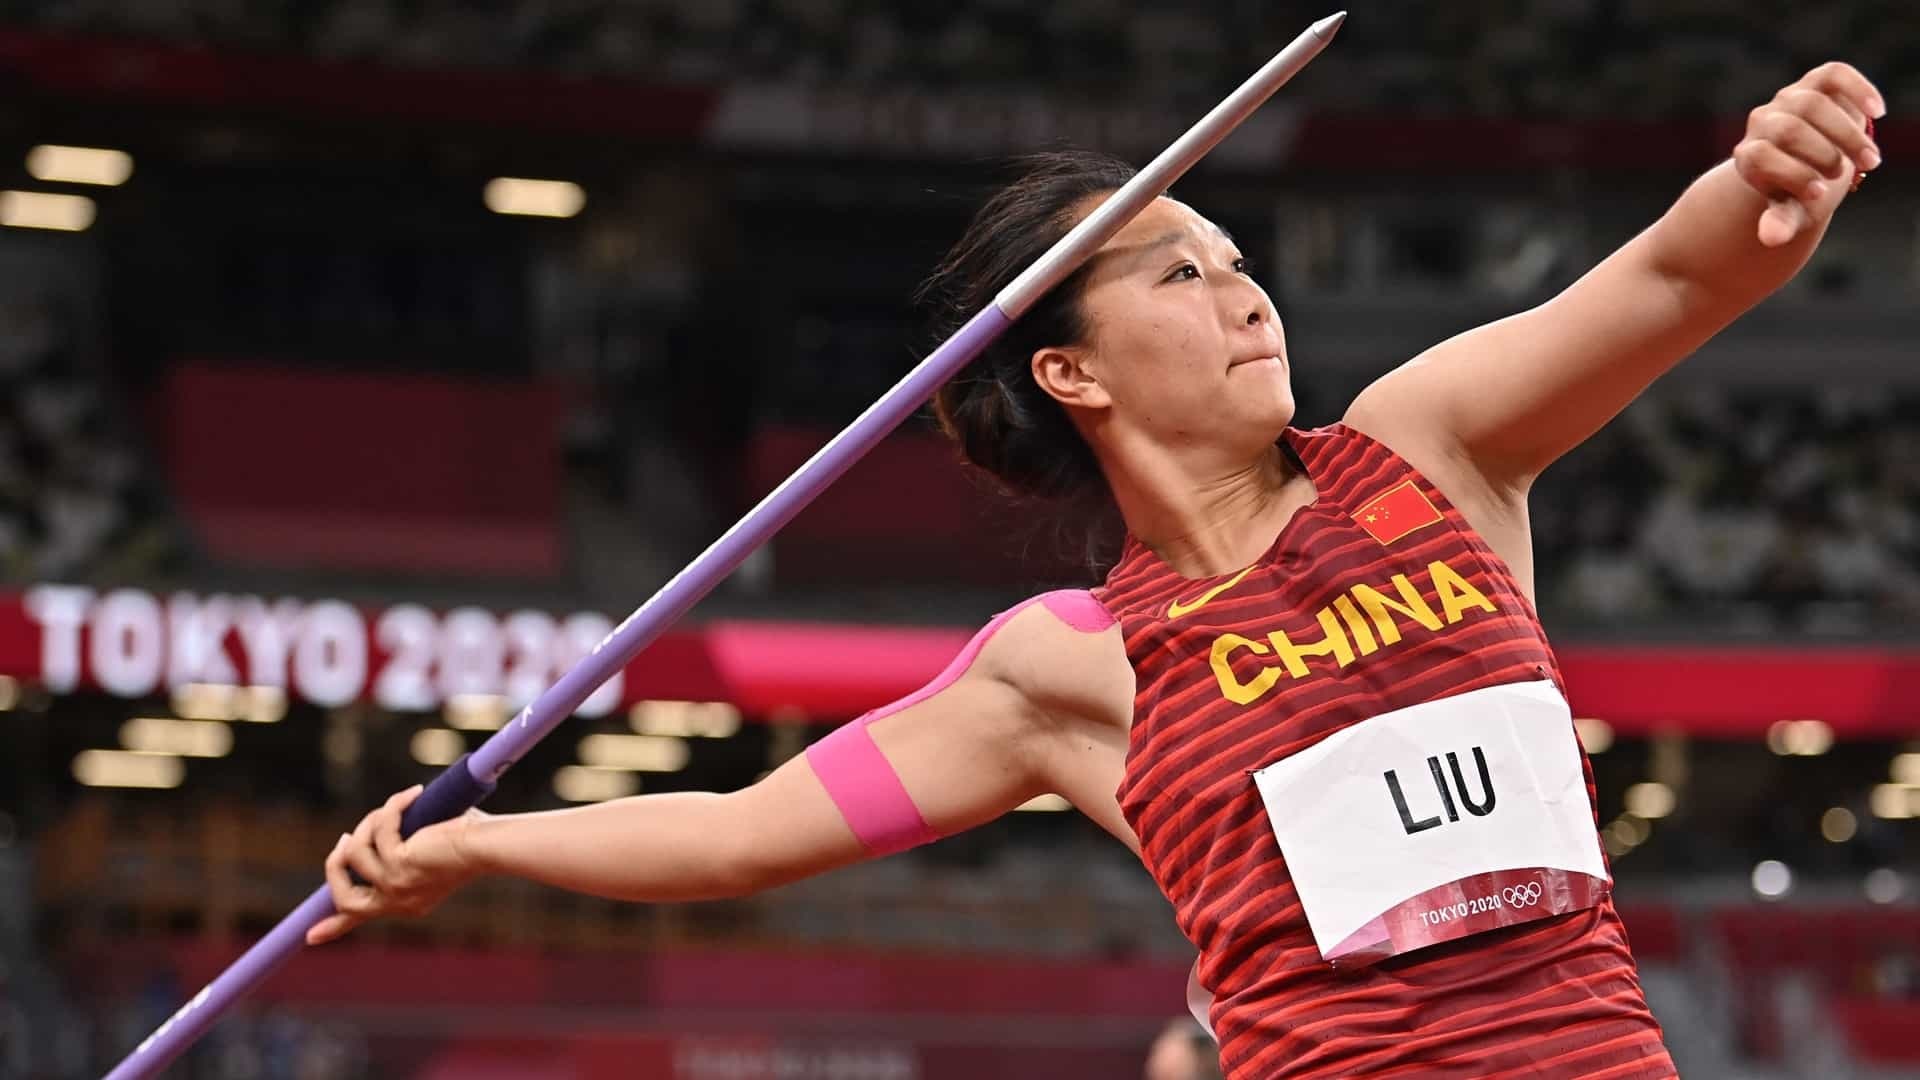 Liu Shiying, Javelin gold medalist, First throw victory, Chinese athlete, 1920x1080 Full HD Desktop